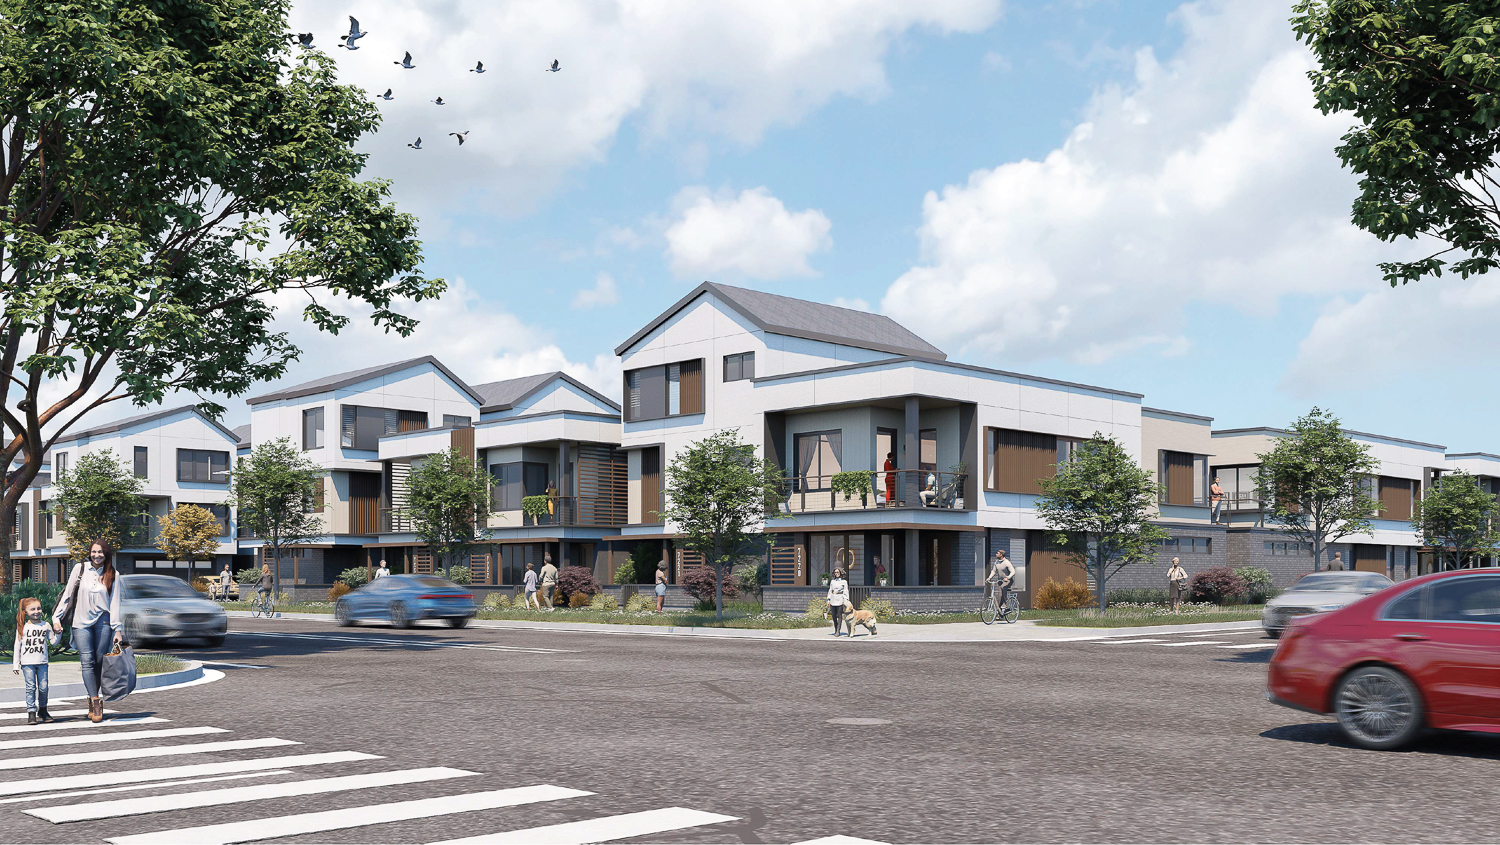 2100 Q Street single-family homes, rendering by TCA Architects